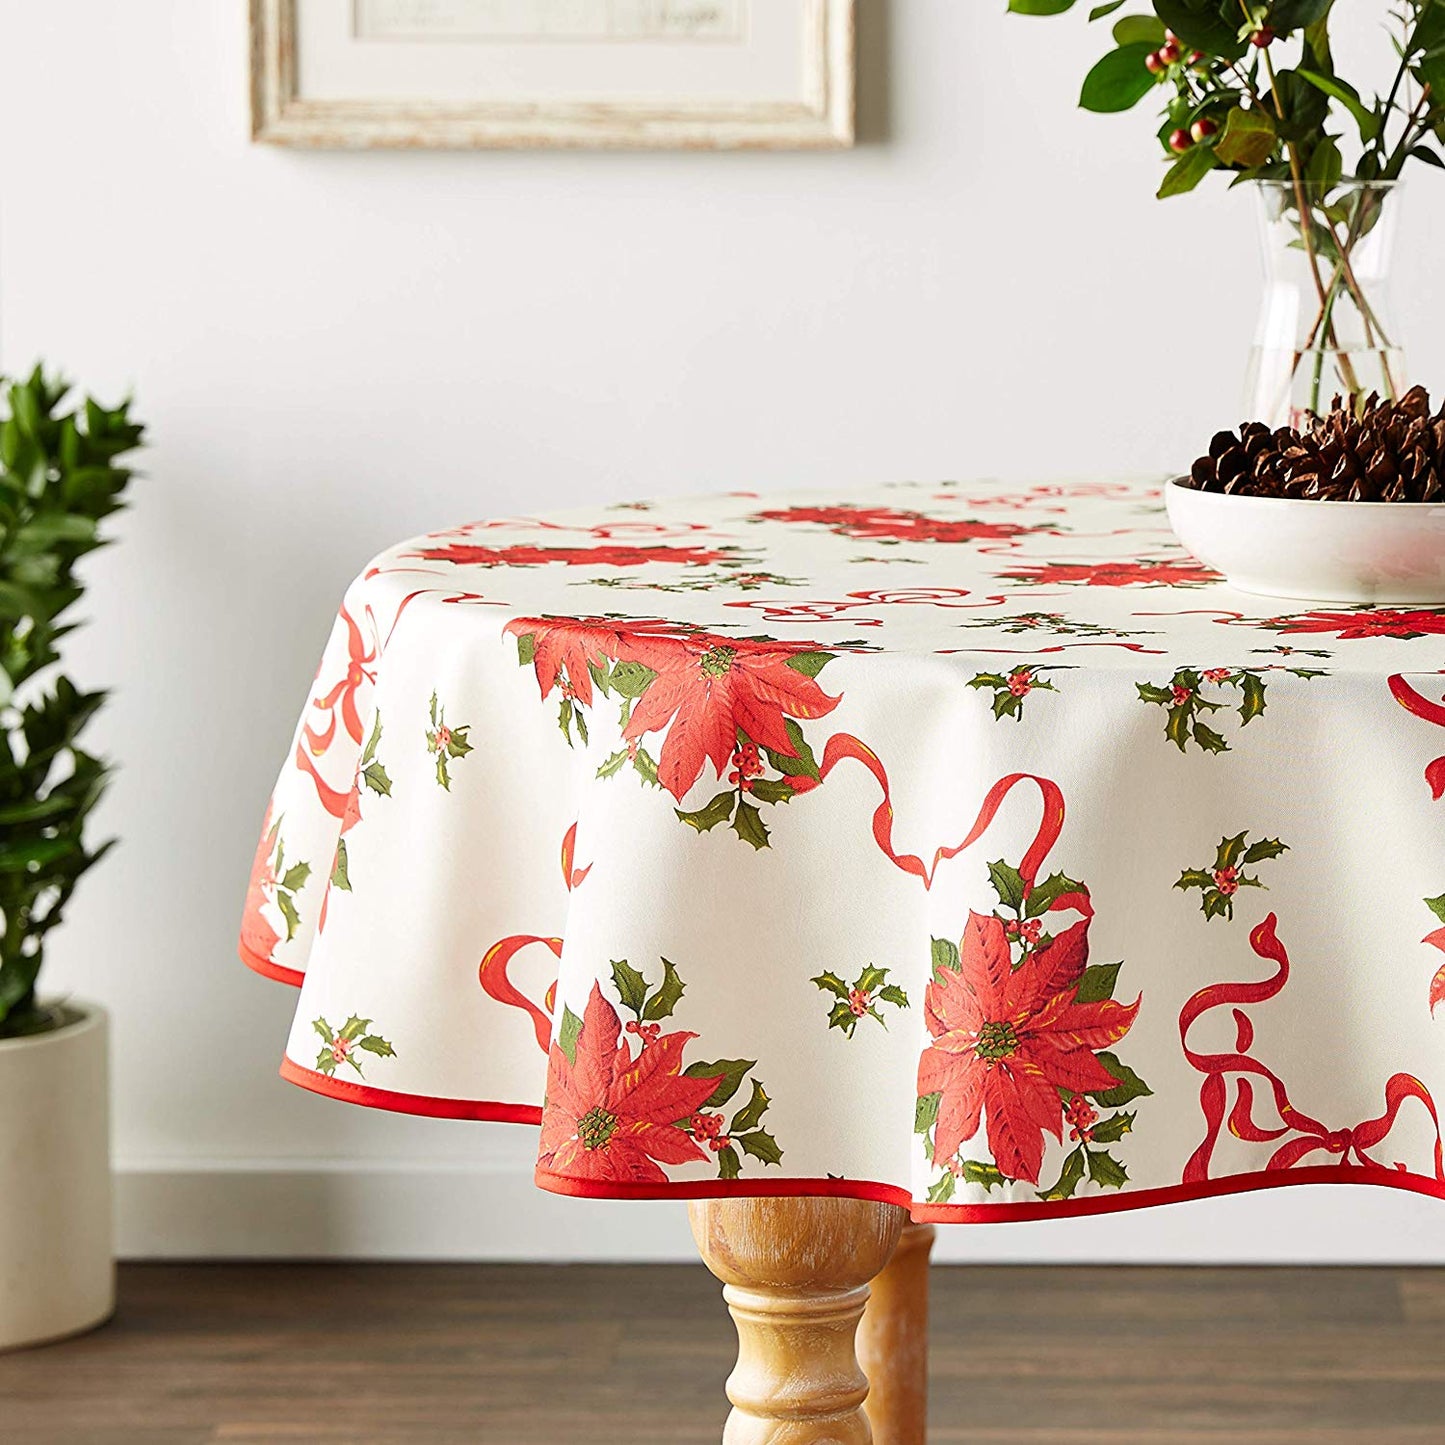 European Christmas Poinsettia Bows and Ribbons Pattern Tablecloths